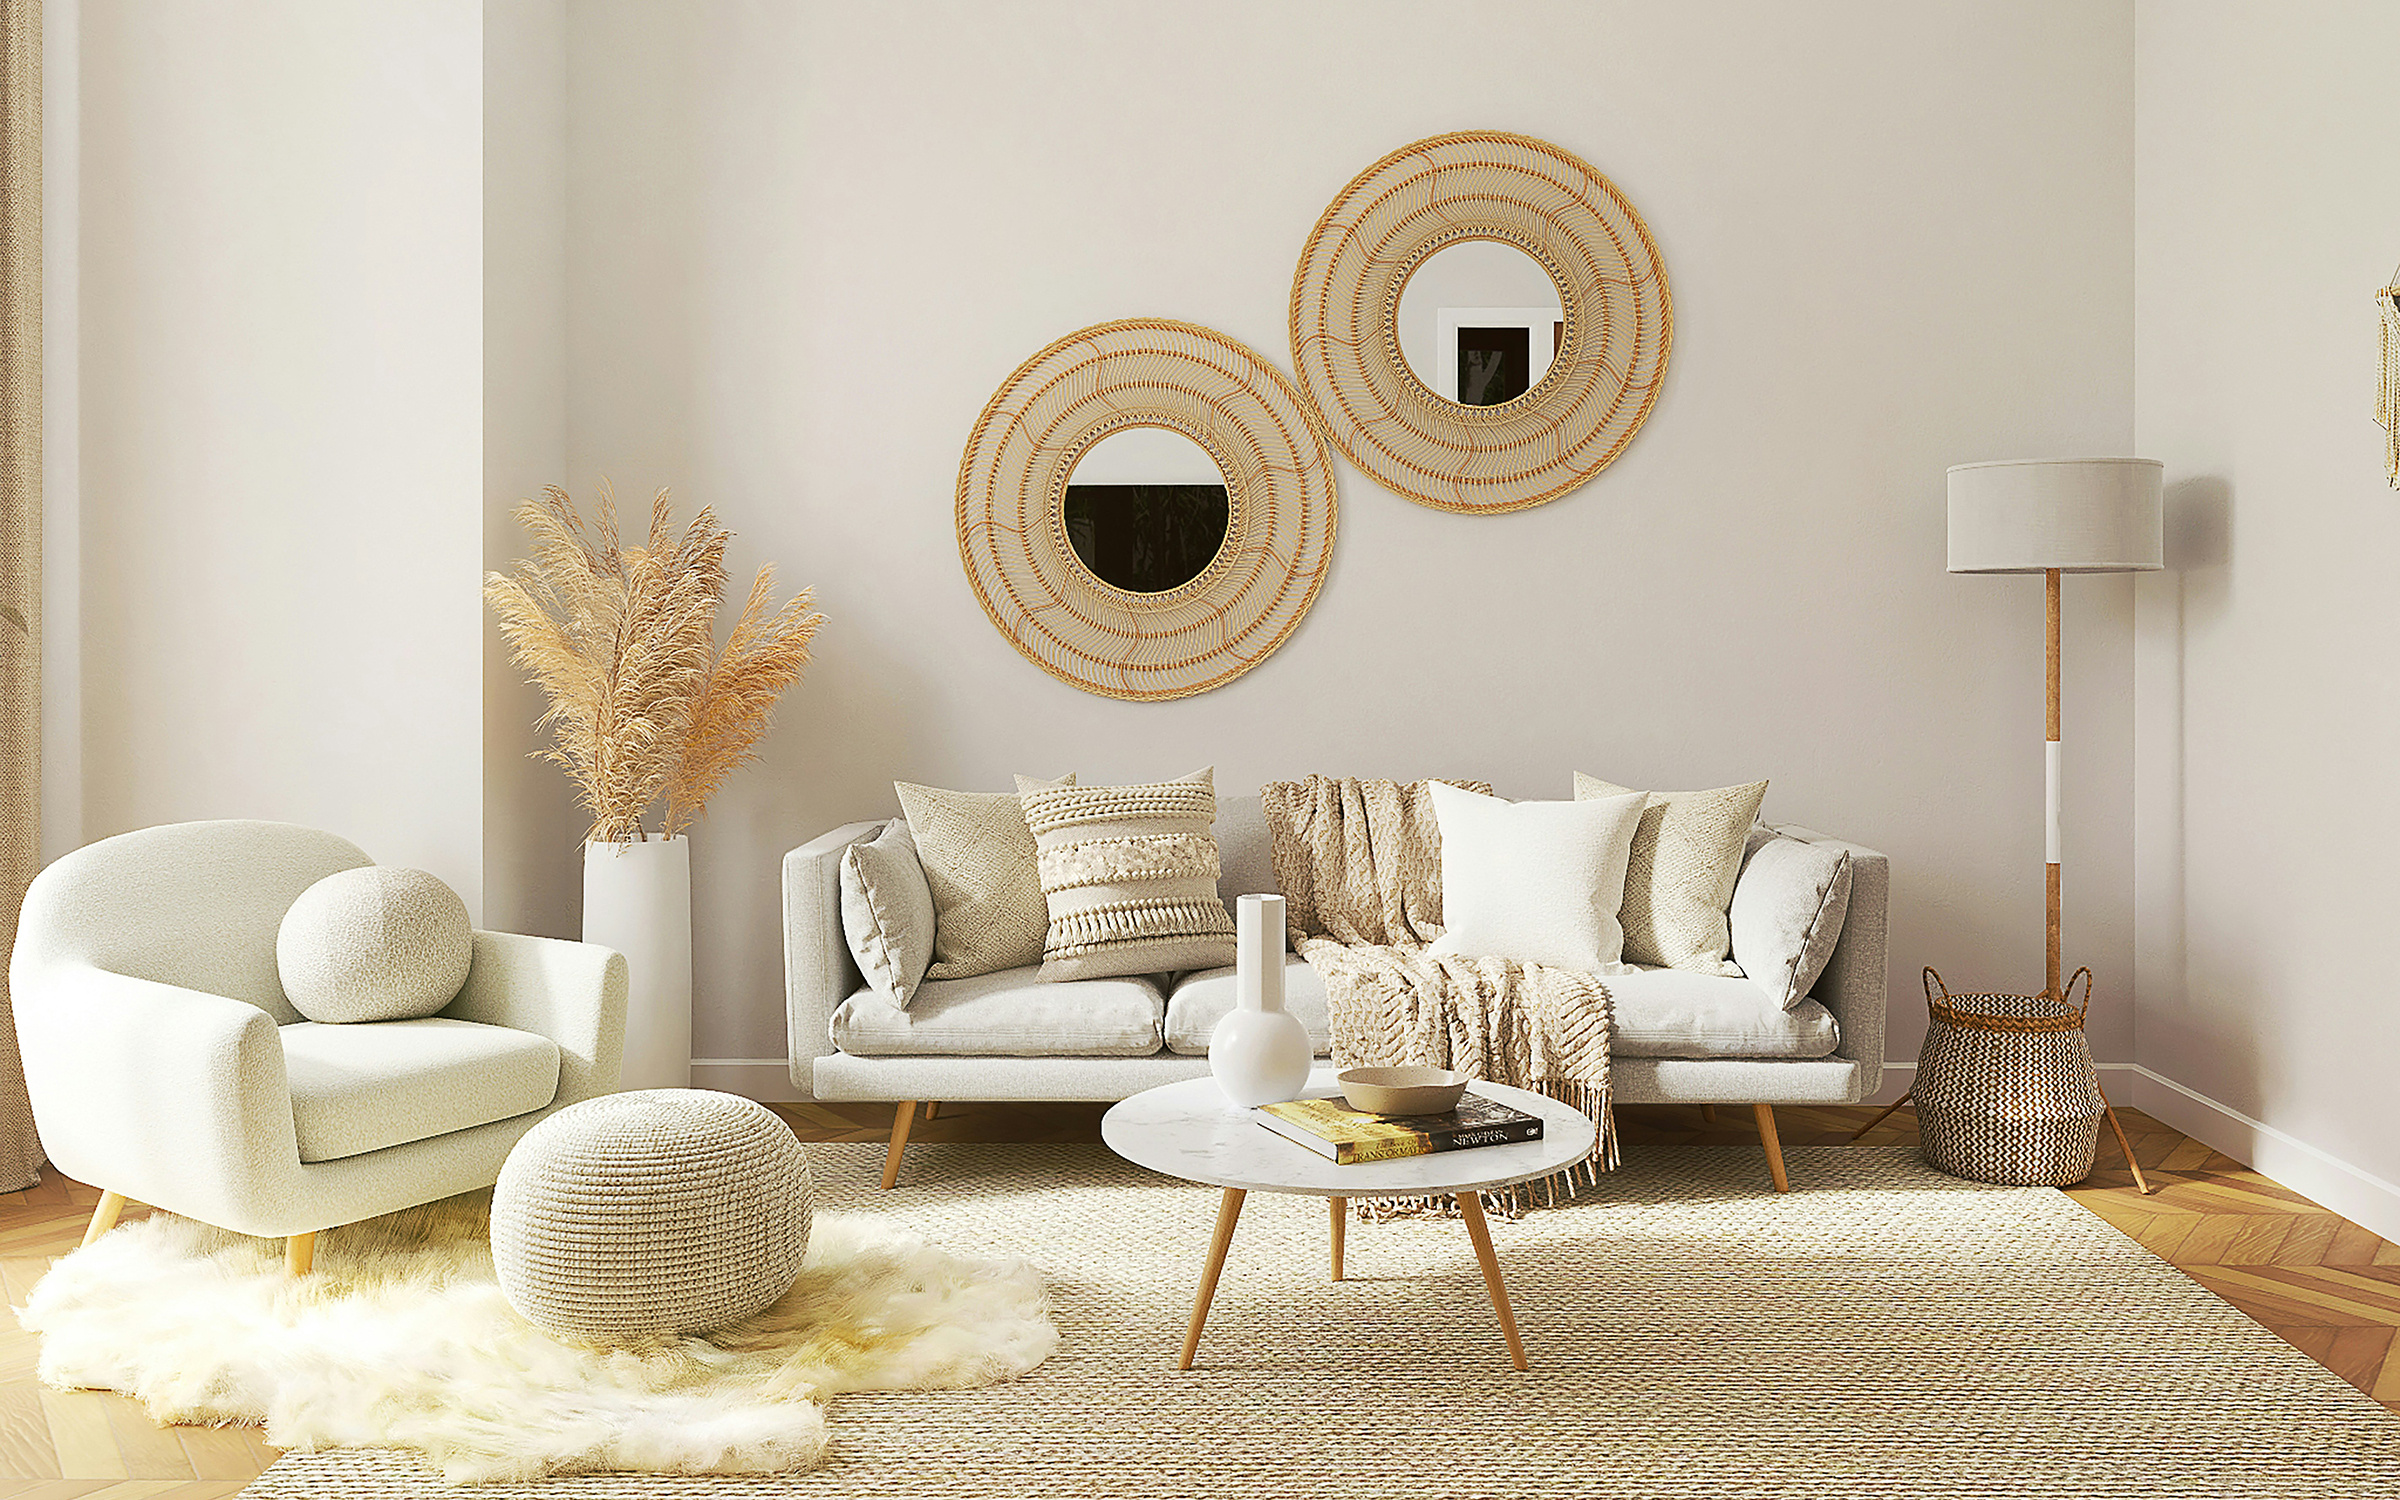 neutral living room with cozy pillows and poufs, soft rug, woven floor mats and simple furnishings